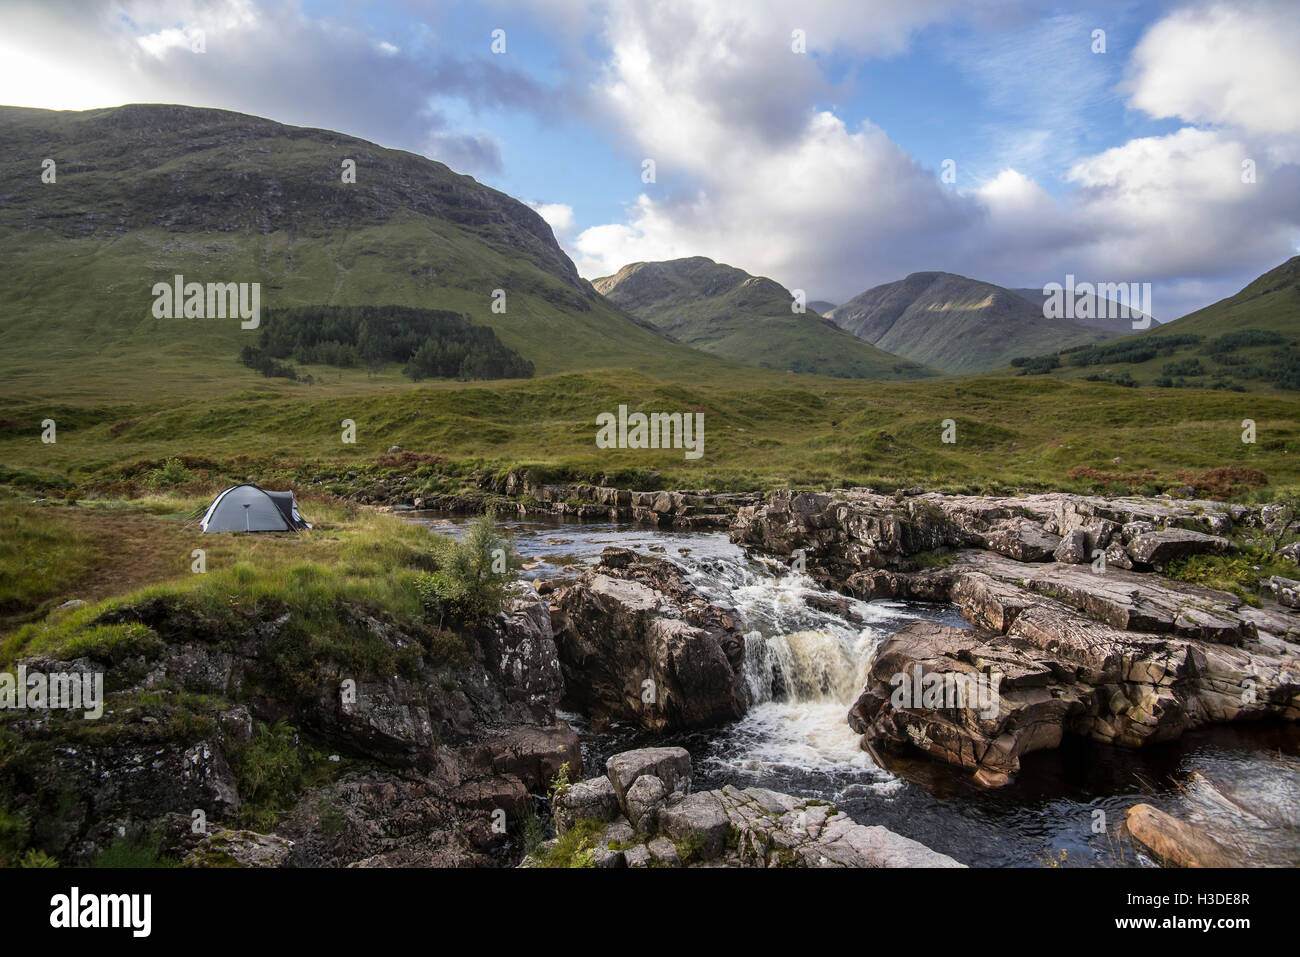 Wild camping with lightweight dome tent along the River Etive in Glen Etive near Glencoe in the Scottish Highlands, Scotland, UK Stock Photo